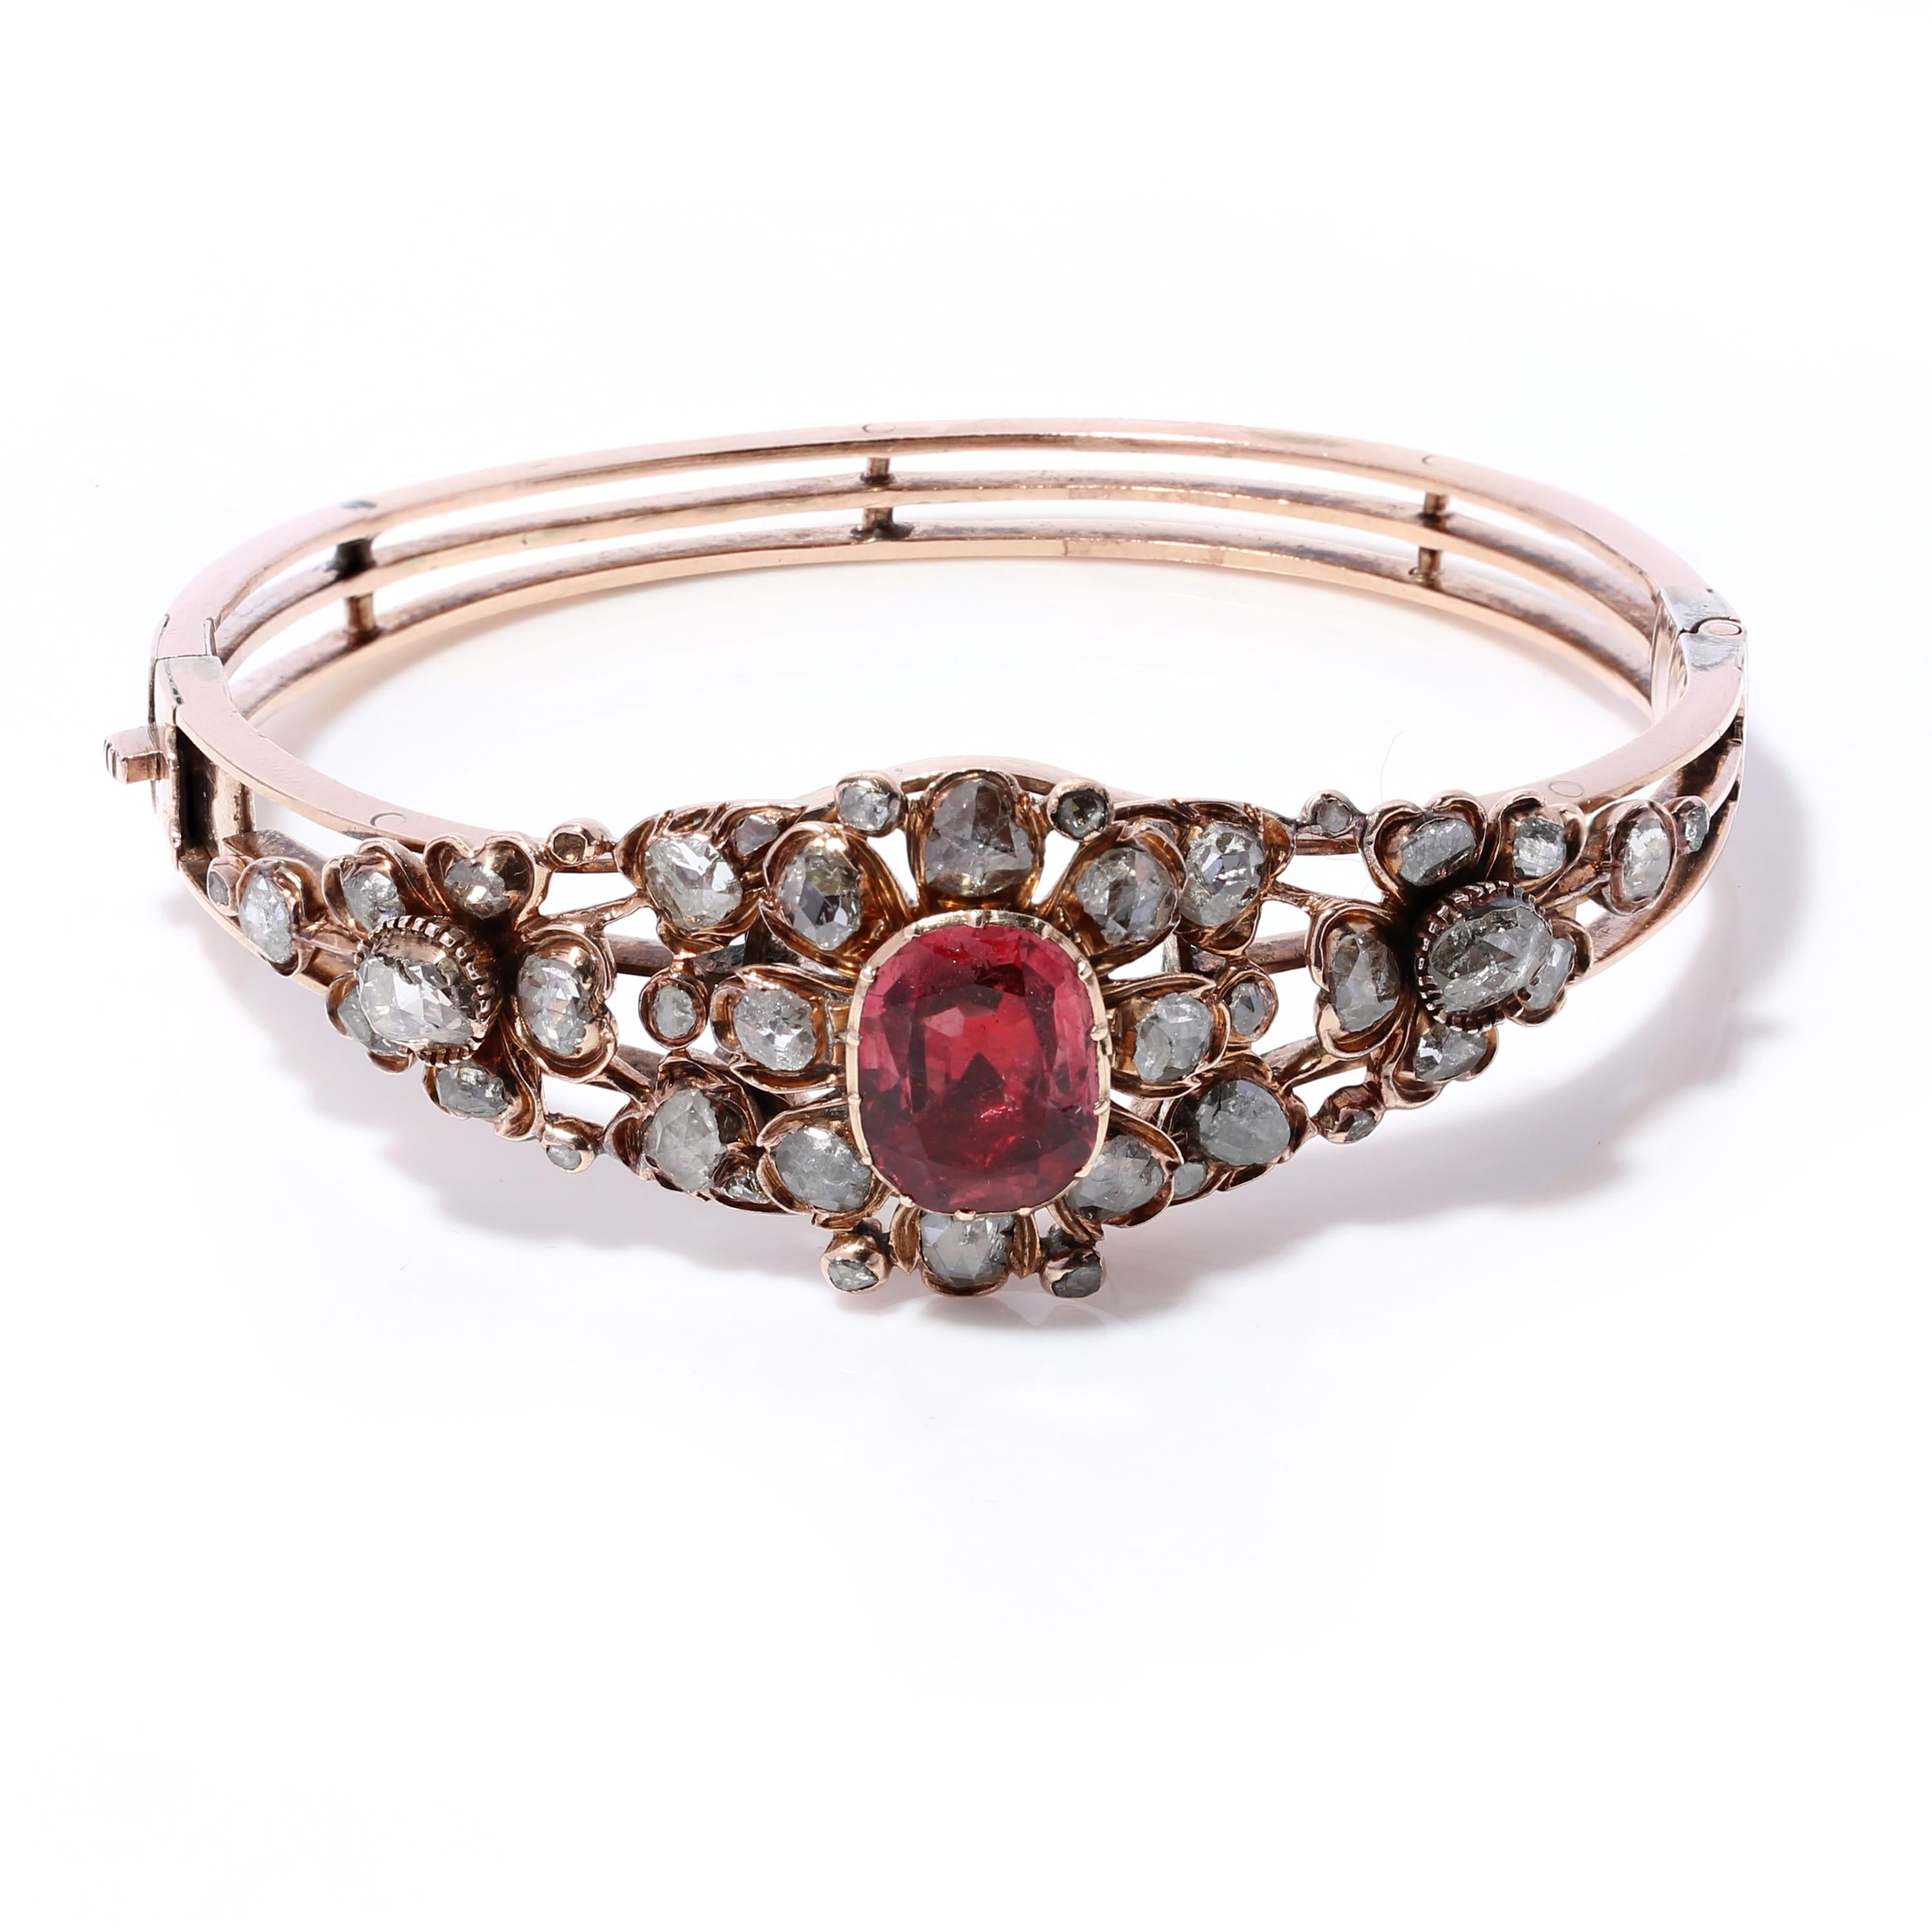 Victorian 15kt Rose Gold Ladies Bangle with 4.00 Ct Spinel and 4.52 Ct Diamond In Good Condition For Sale In Braintree, GB